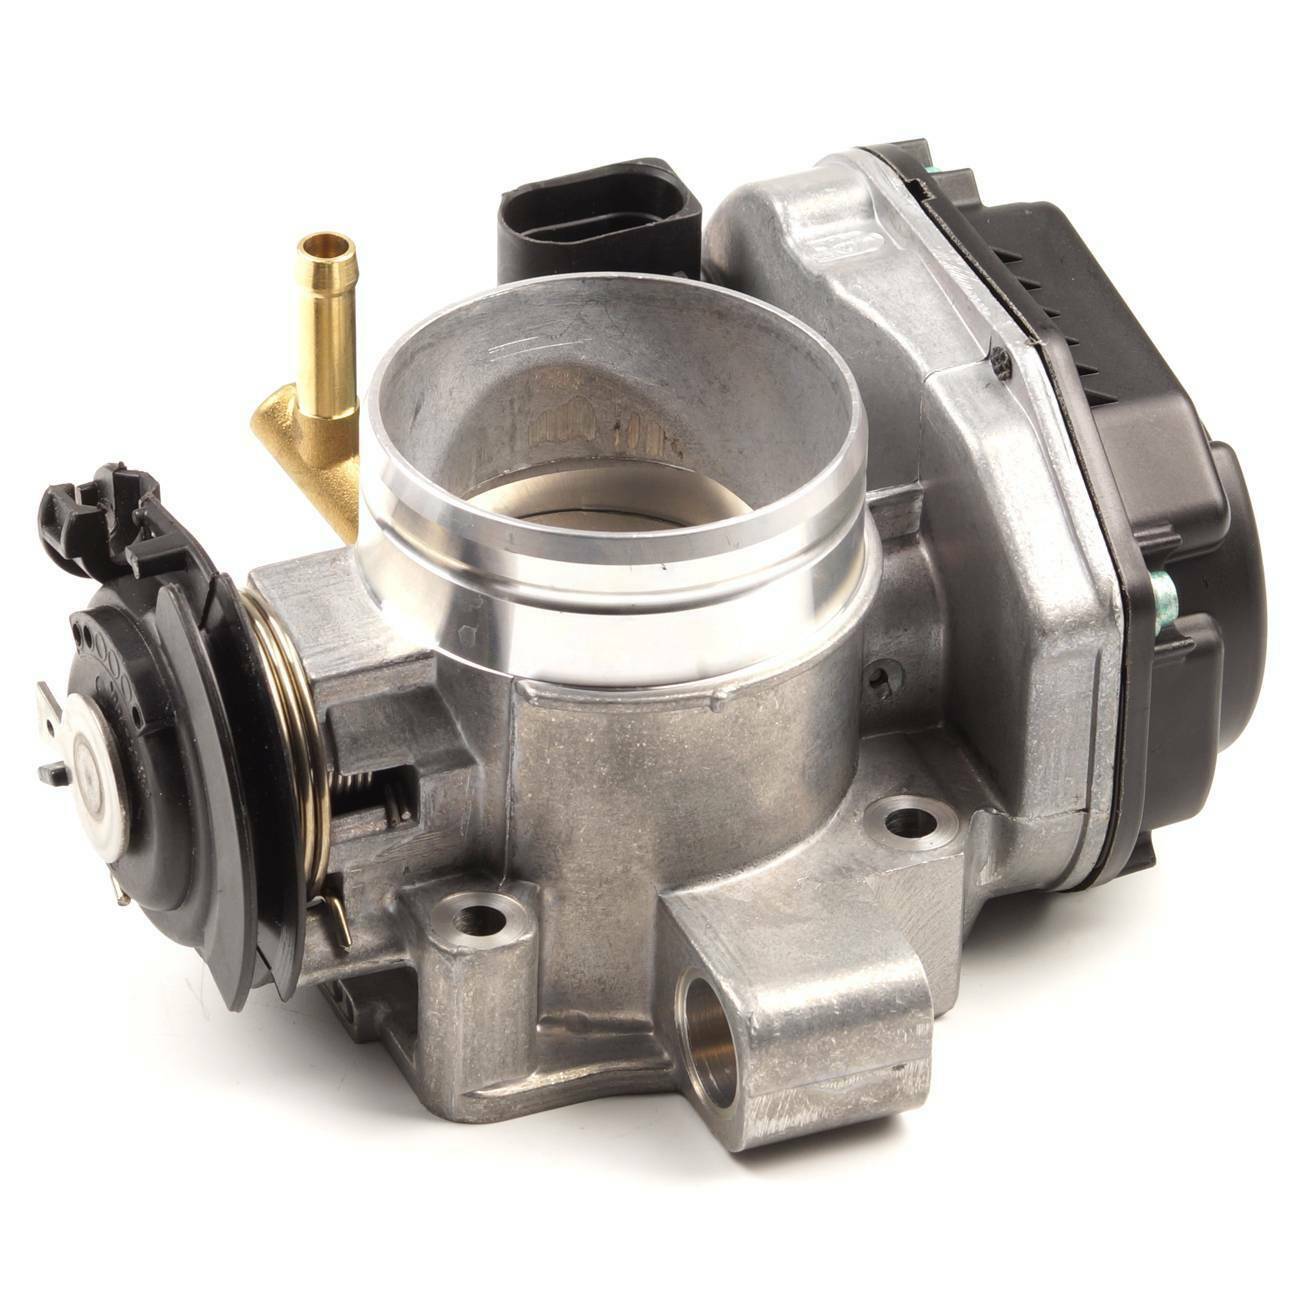 Throttle Body Assembly for VW Golf IV Jetta Cabriolet 1E7 2.0L 037133064J German Made